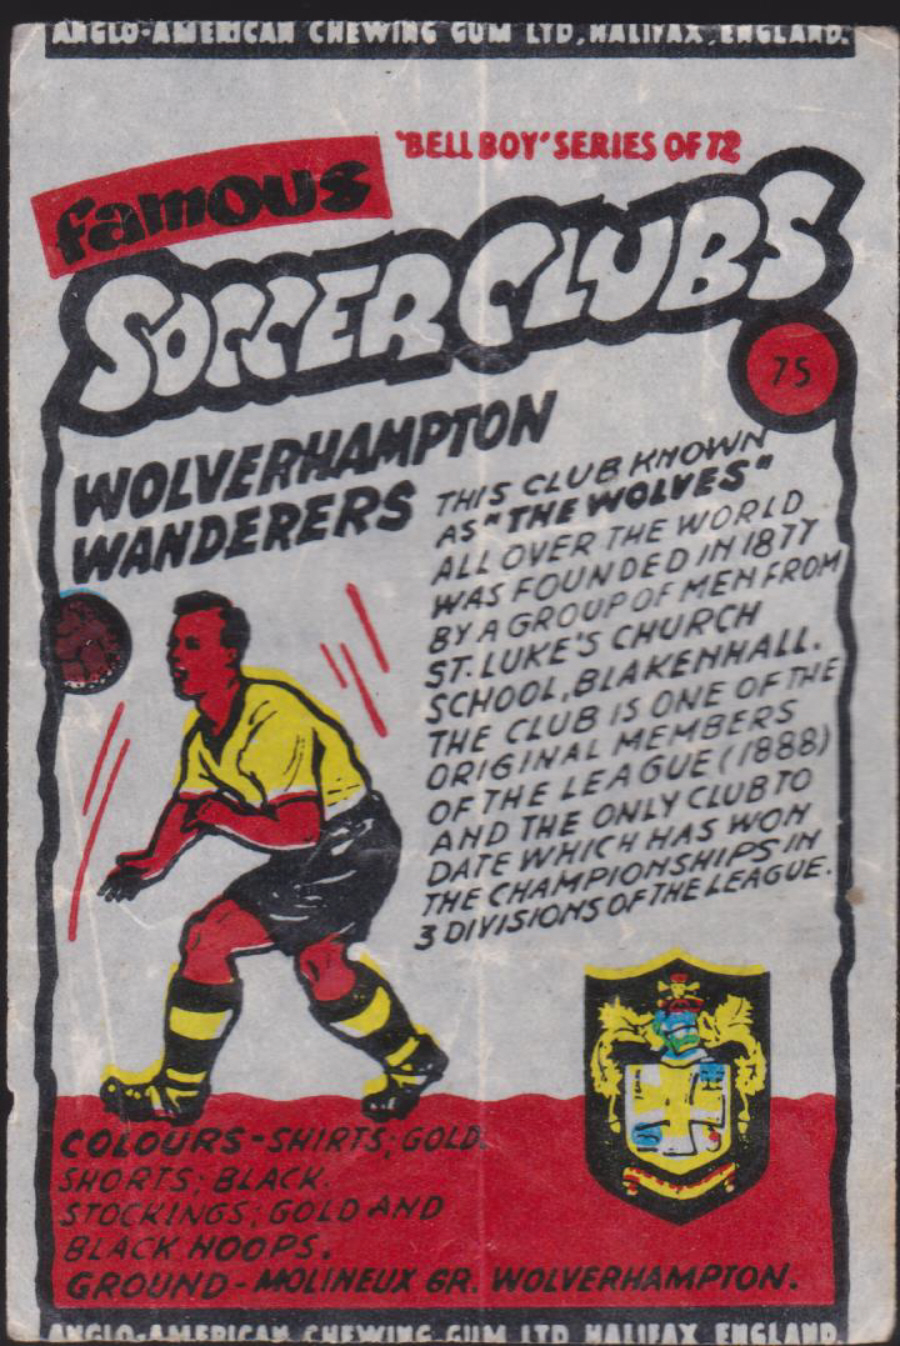 Anglo-American-Chewing-Gum-Wax-Wrapper-Famous-Soccer-Clubs-No-75 - Wolverhampton Wanderers - Click Image to Close